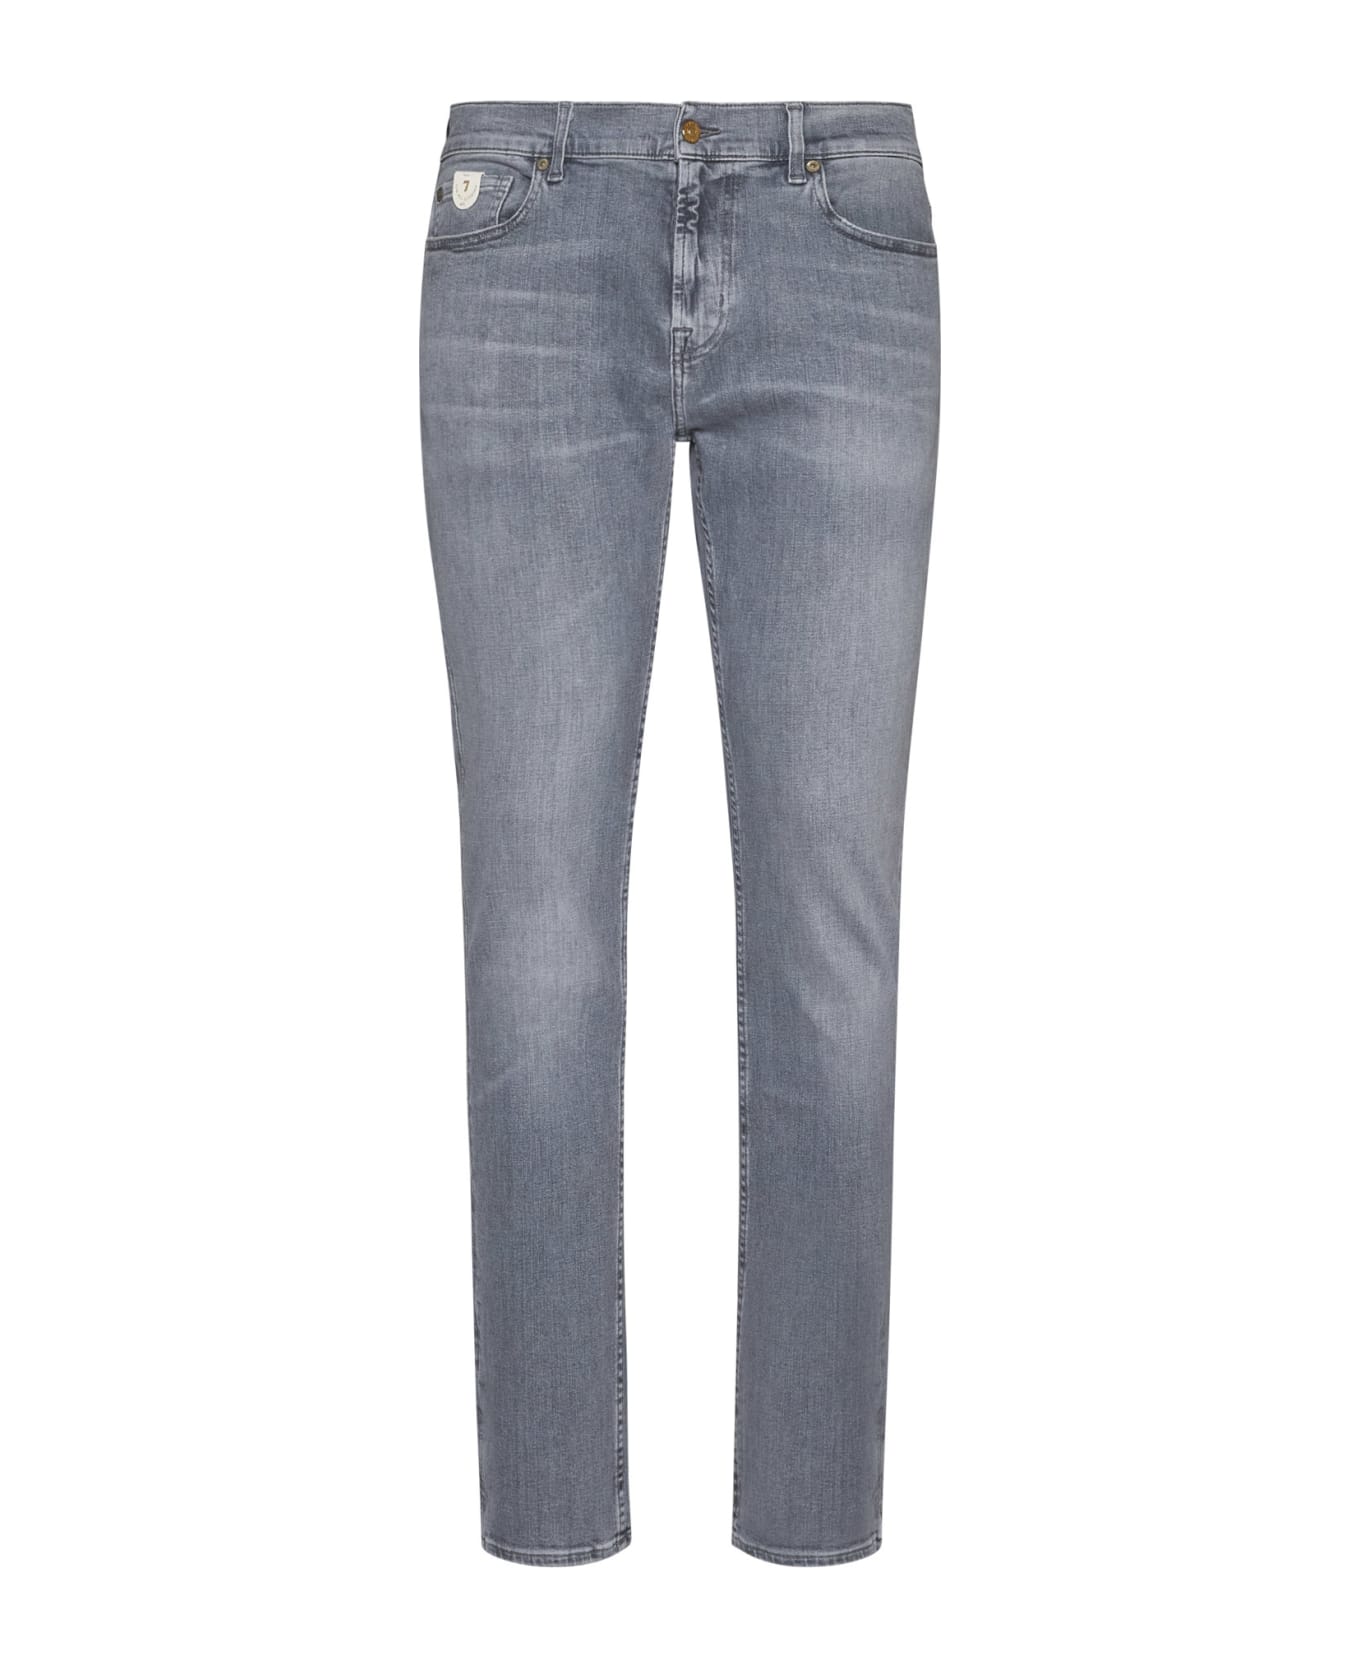 7 For All Mankind Jeans - Grey デニム